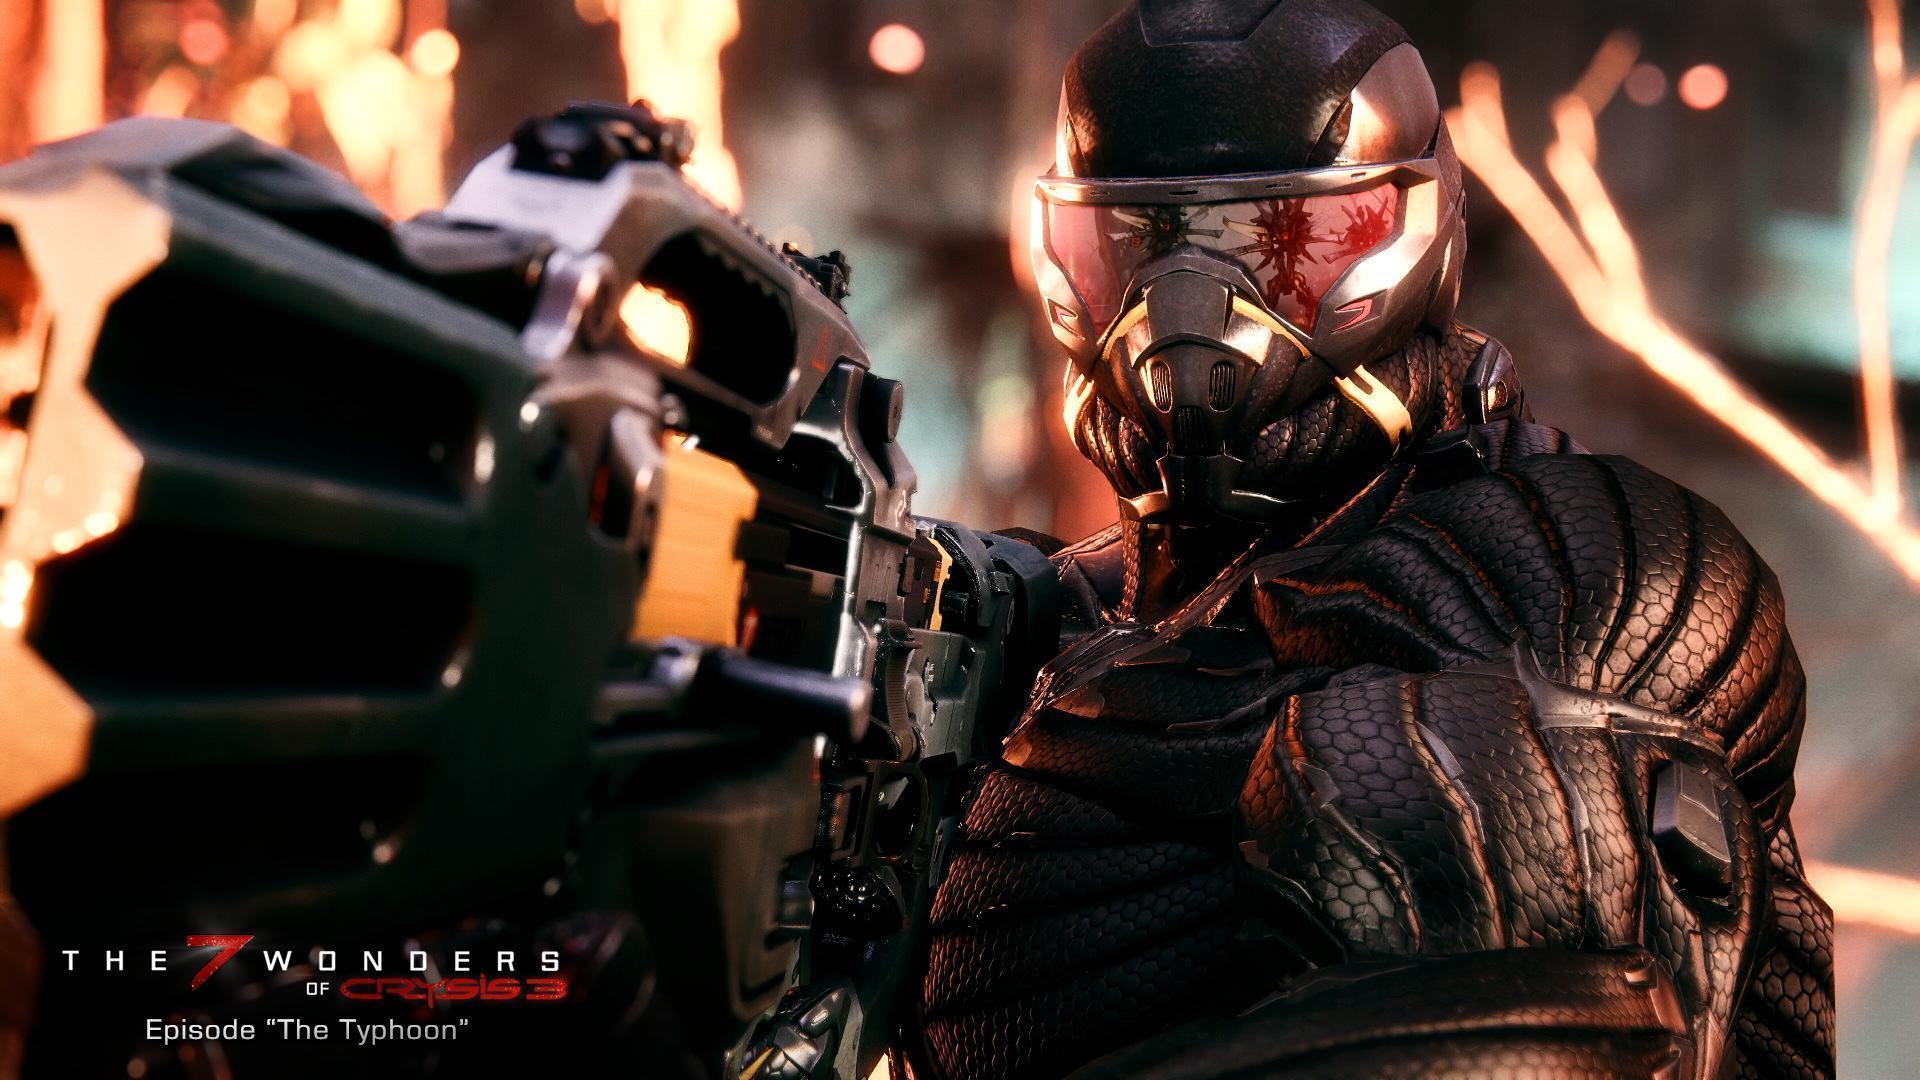 New Crysis 3 Exclusive HD Wallpaper